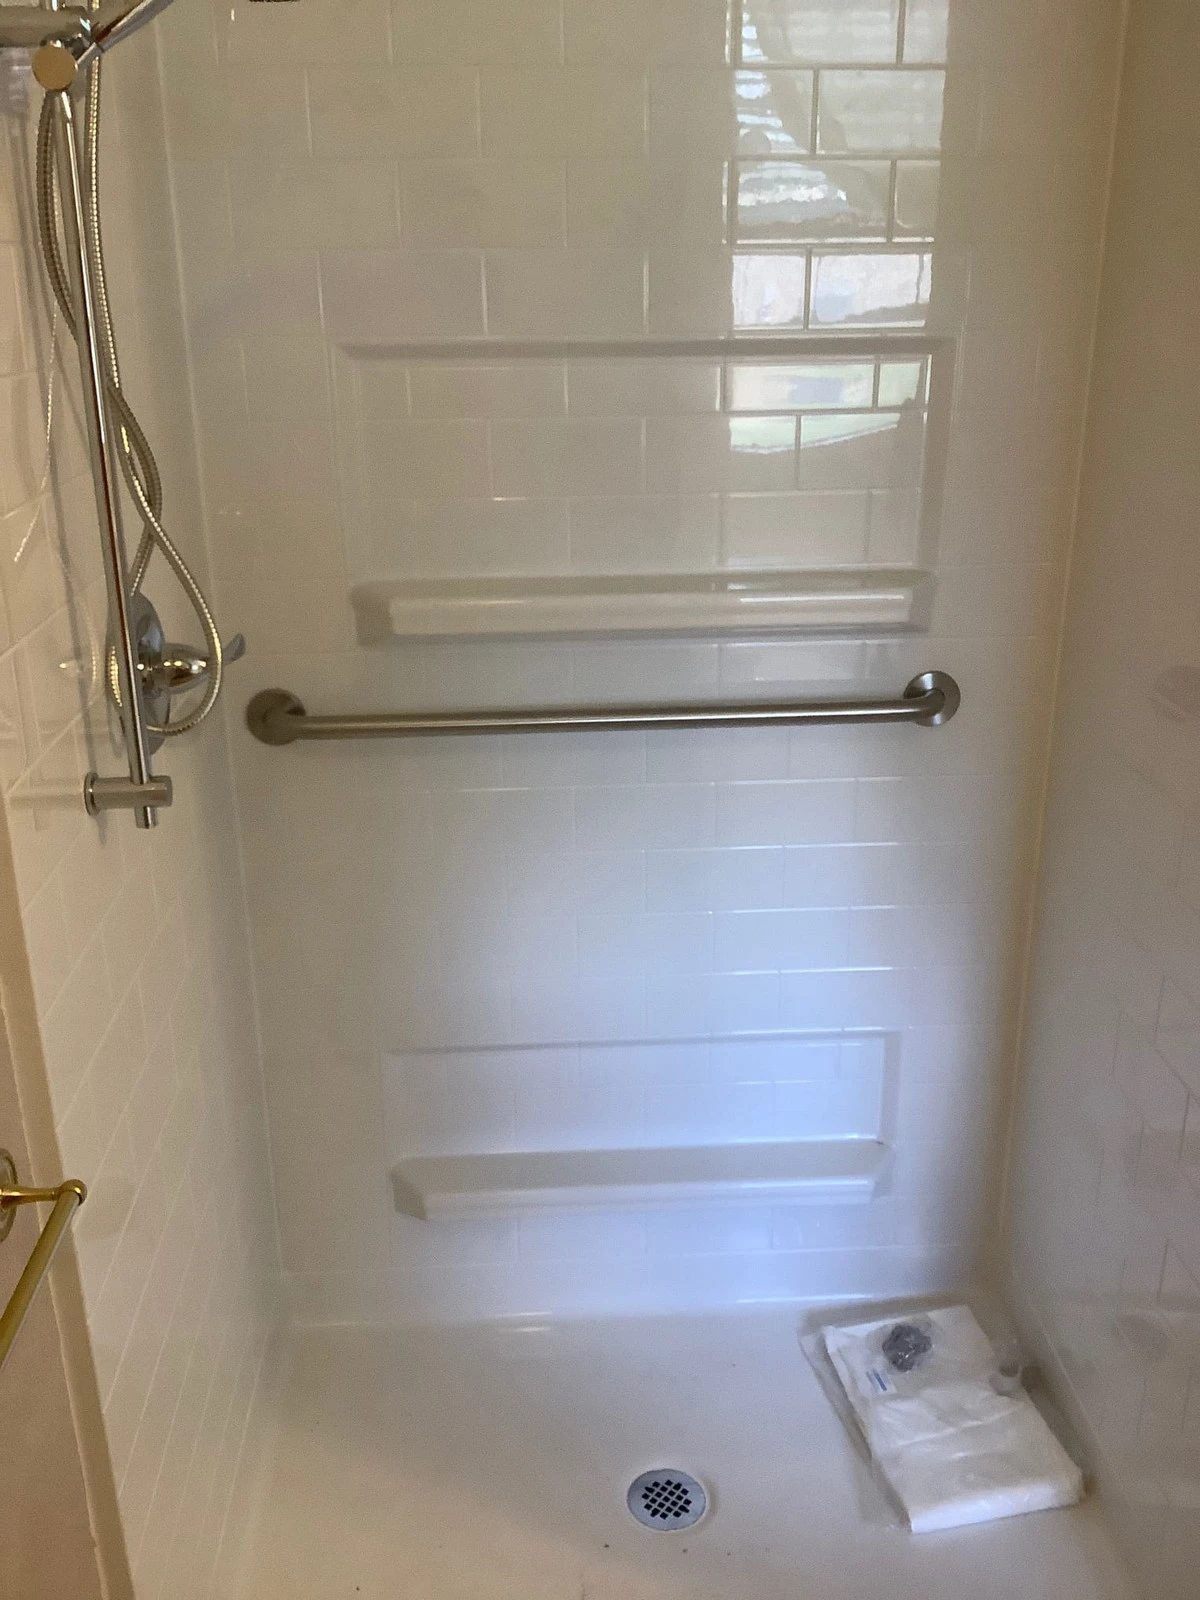 A residential shower that has had a grab bar and detachable shower head installed by Mr. Handyman.